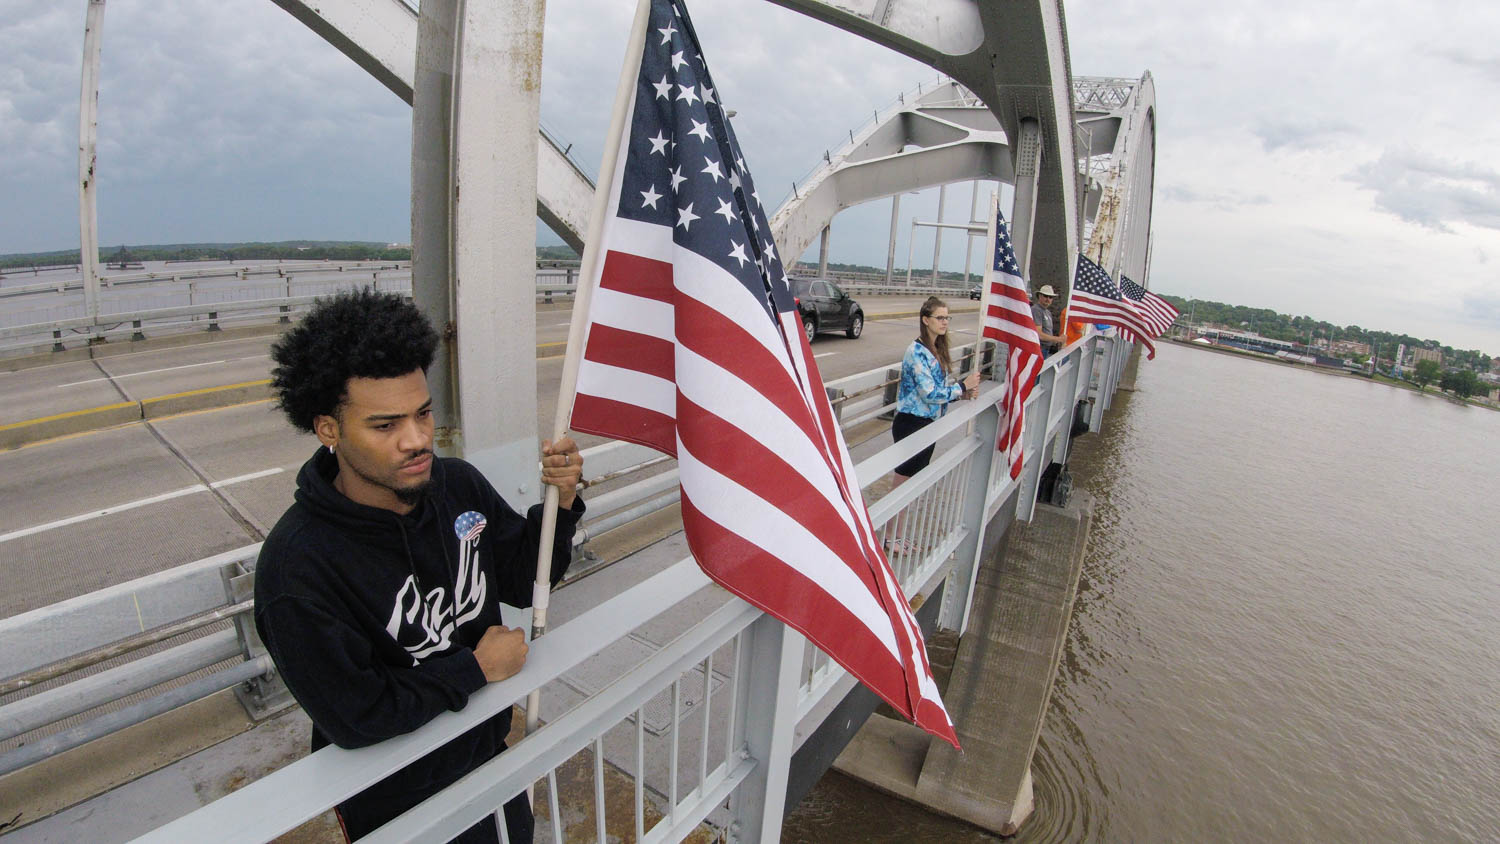 Darron Austin, of Rock Island, and approximately 200 other volunteers line the length of the Master Sgt. Stanley Talbot Memorial Bridge over the Mississippi River between Rock Island and Davenport with U.S. Flags in honor of Flag Day Thursday, June 14, 2018. (Todd Mizener - Dispatch/Argus) 